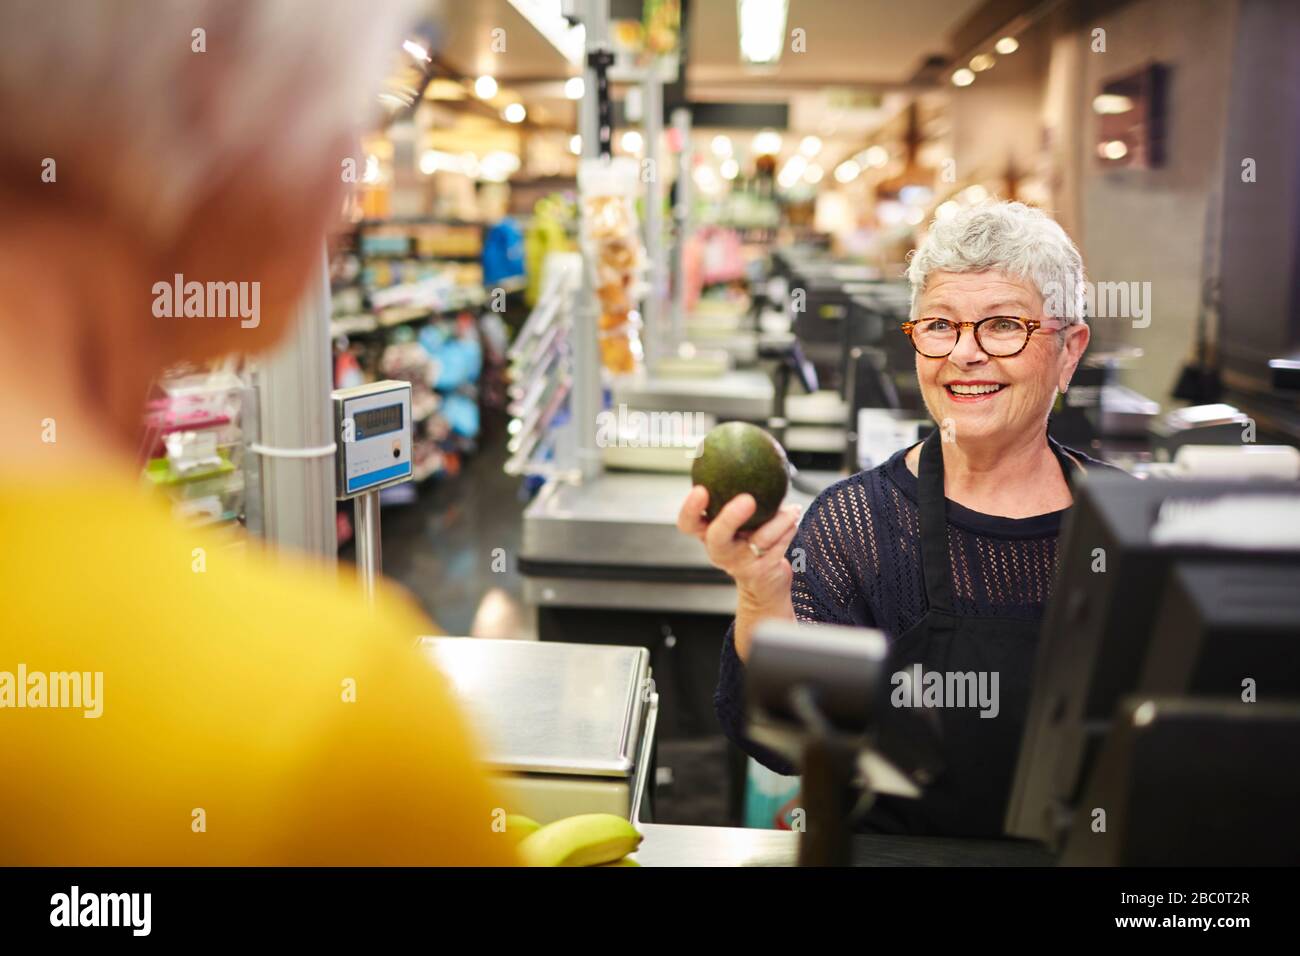 Smiling senior female cashier helping customer at grocery checkout Stock Photo